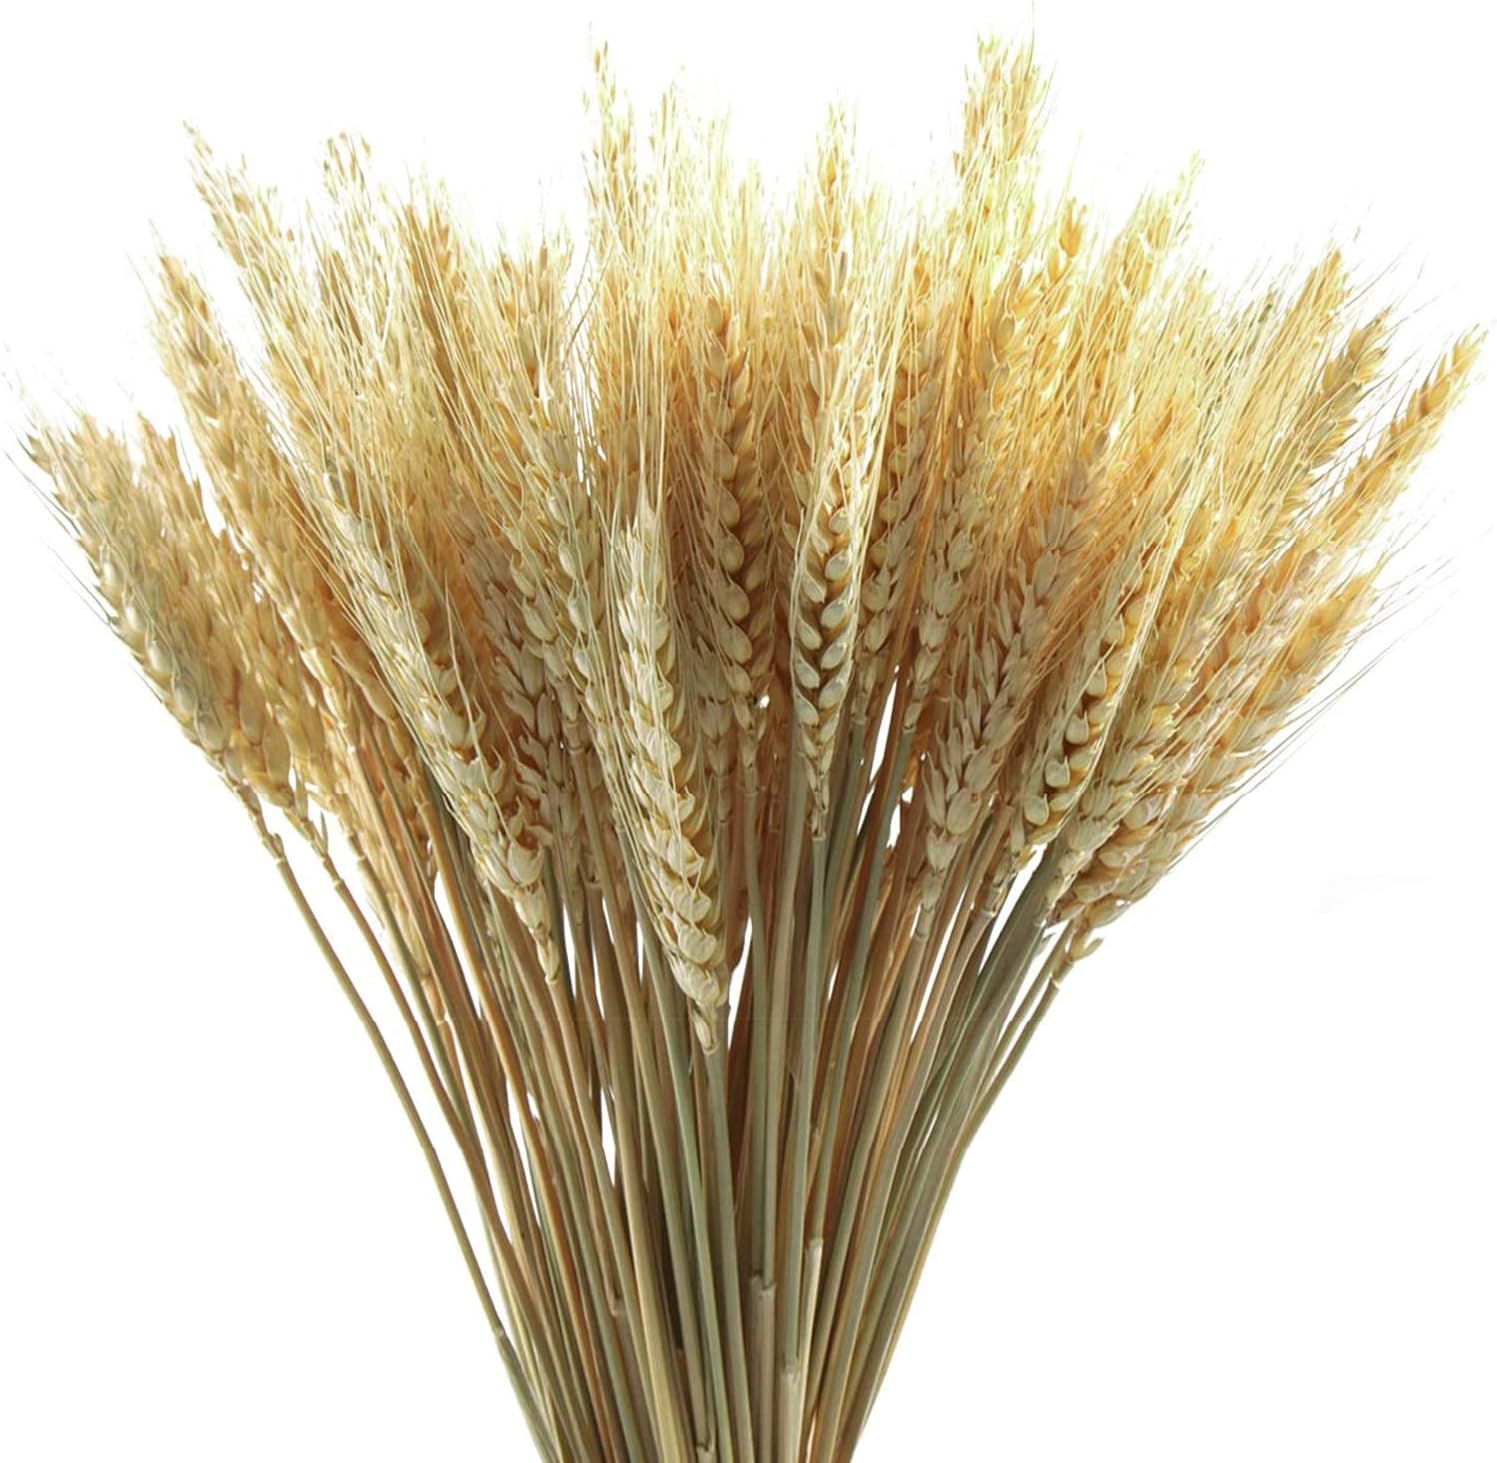 100 Stems Dried Wheat Stalks Dried, Natural Ear of Wheat Grain Flowers for Home Dining Table Flower  | Amazon (US)